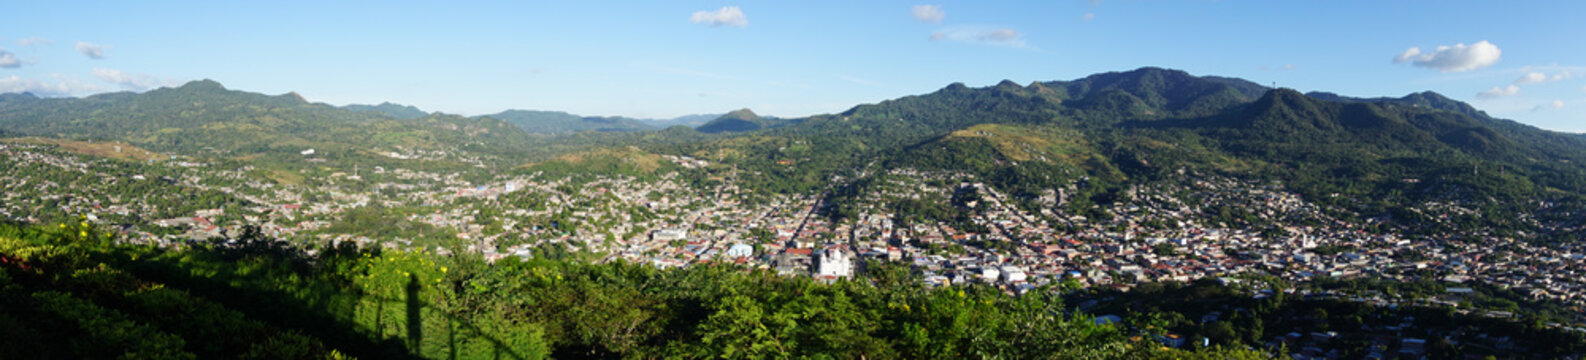 nice view from the lookout in the city of matagalpa